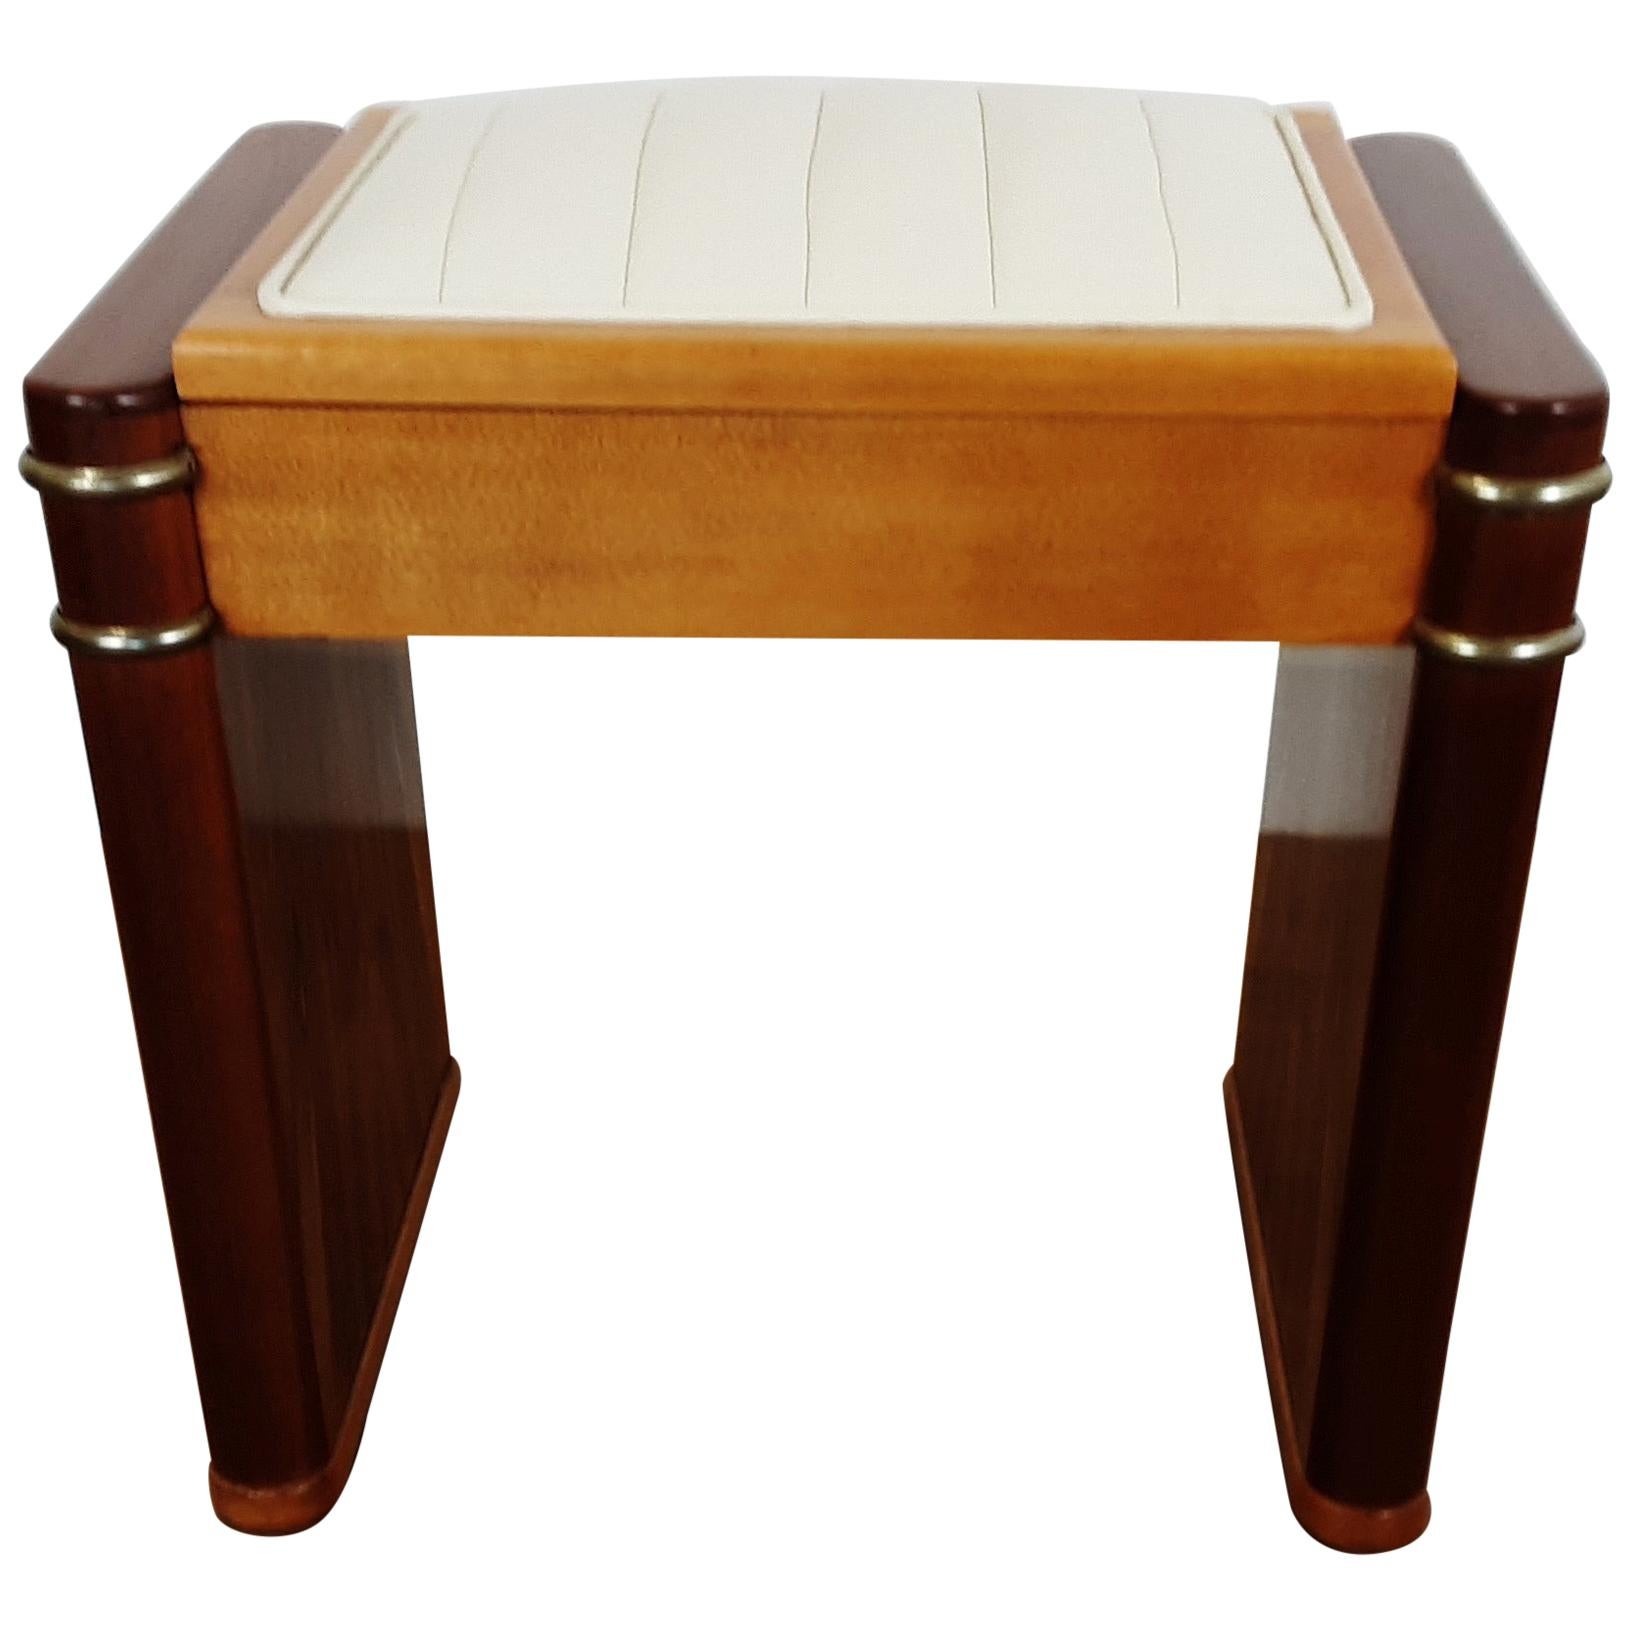 British Art Deco Piano Stool by Ministools in Satin Birch and Walnut For Sale